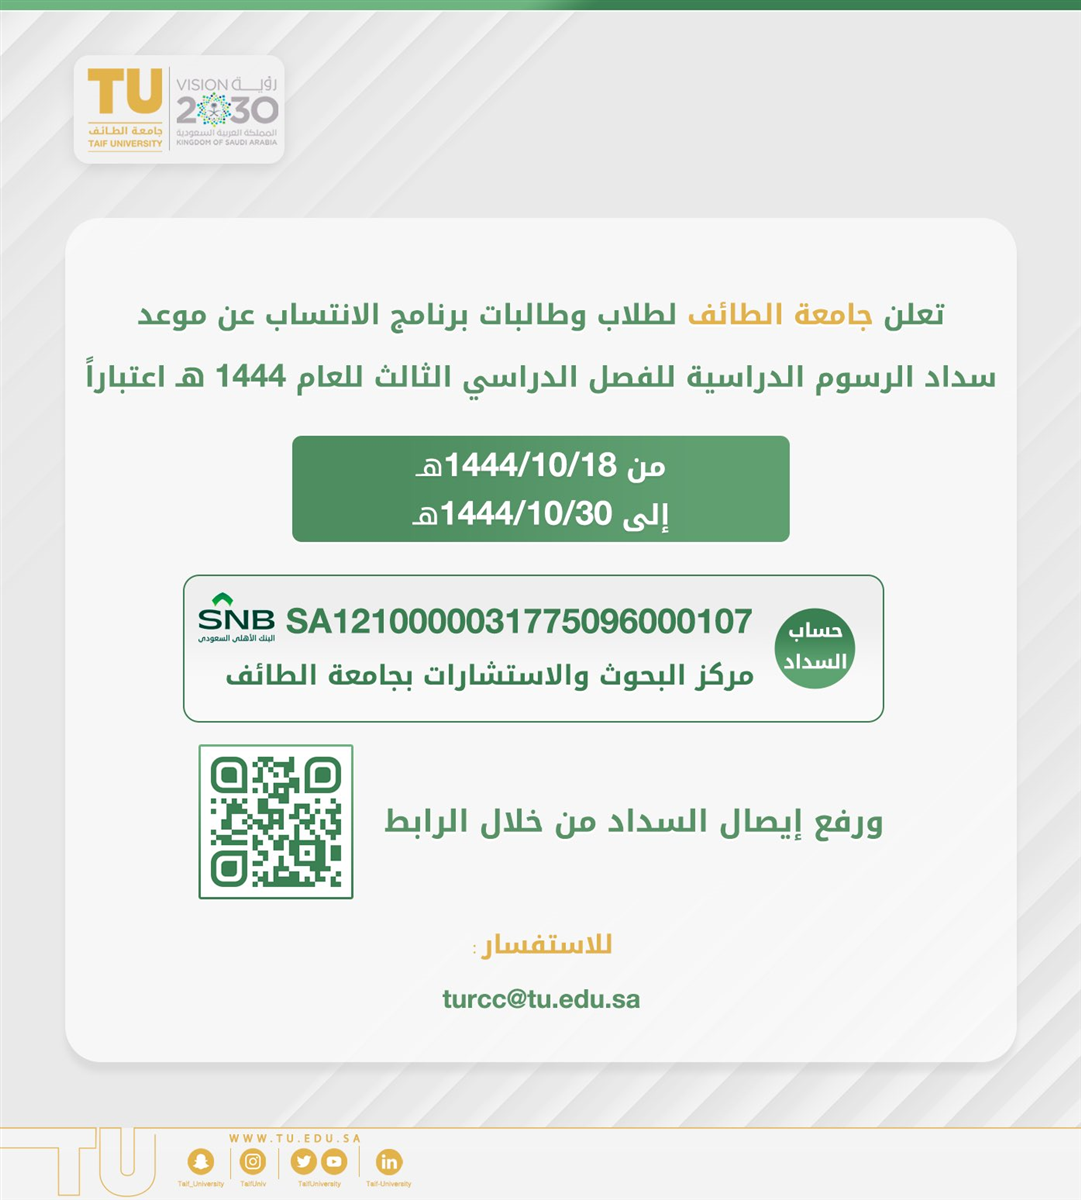 The date for paying the tuition fees for the affiliation program for the third semester of the year 1444 AH